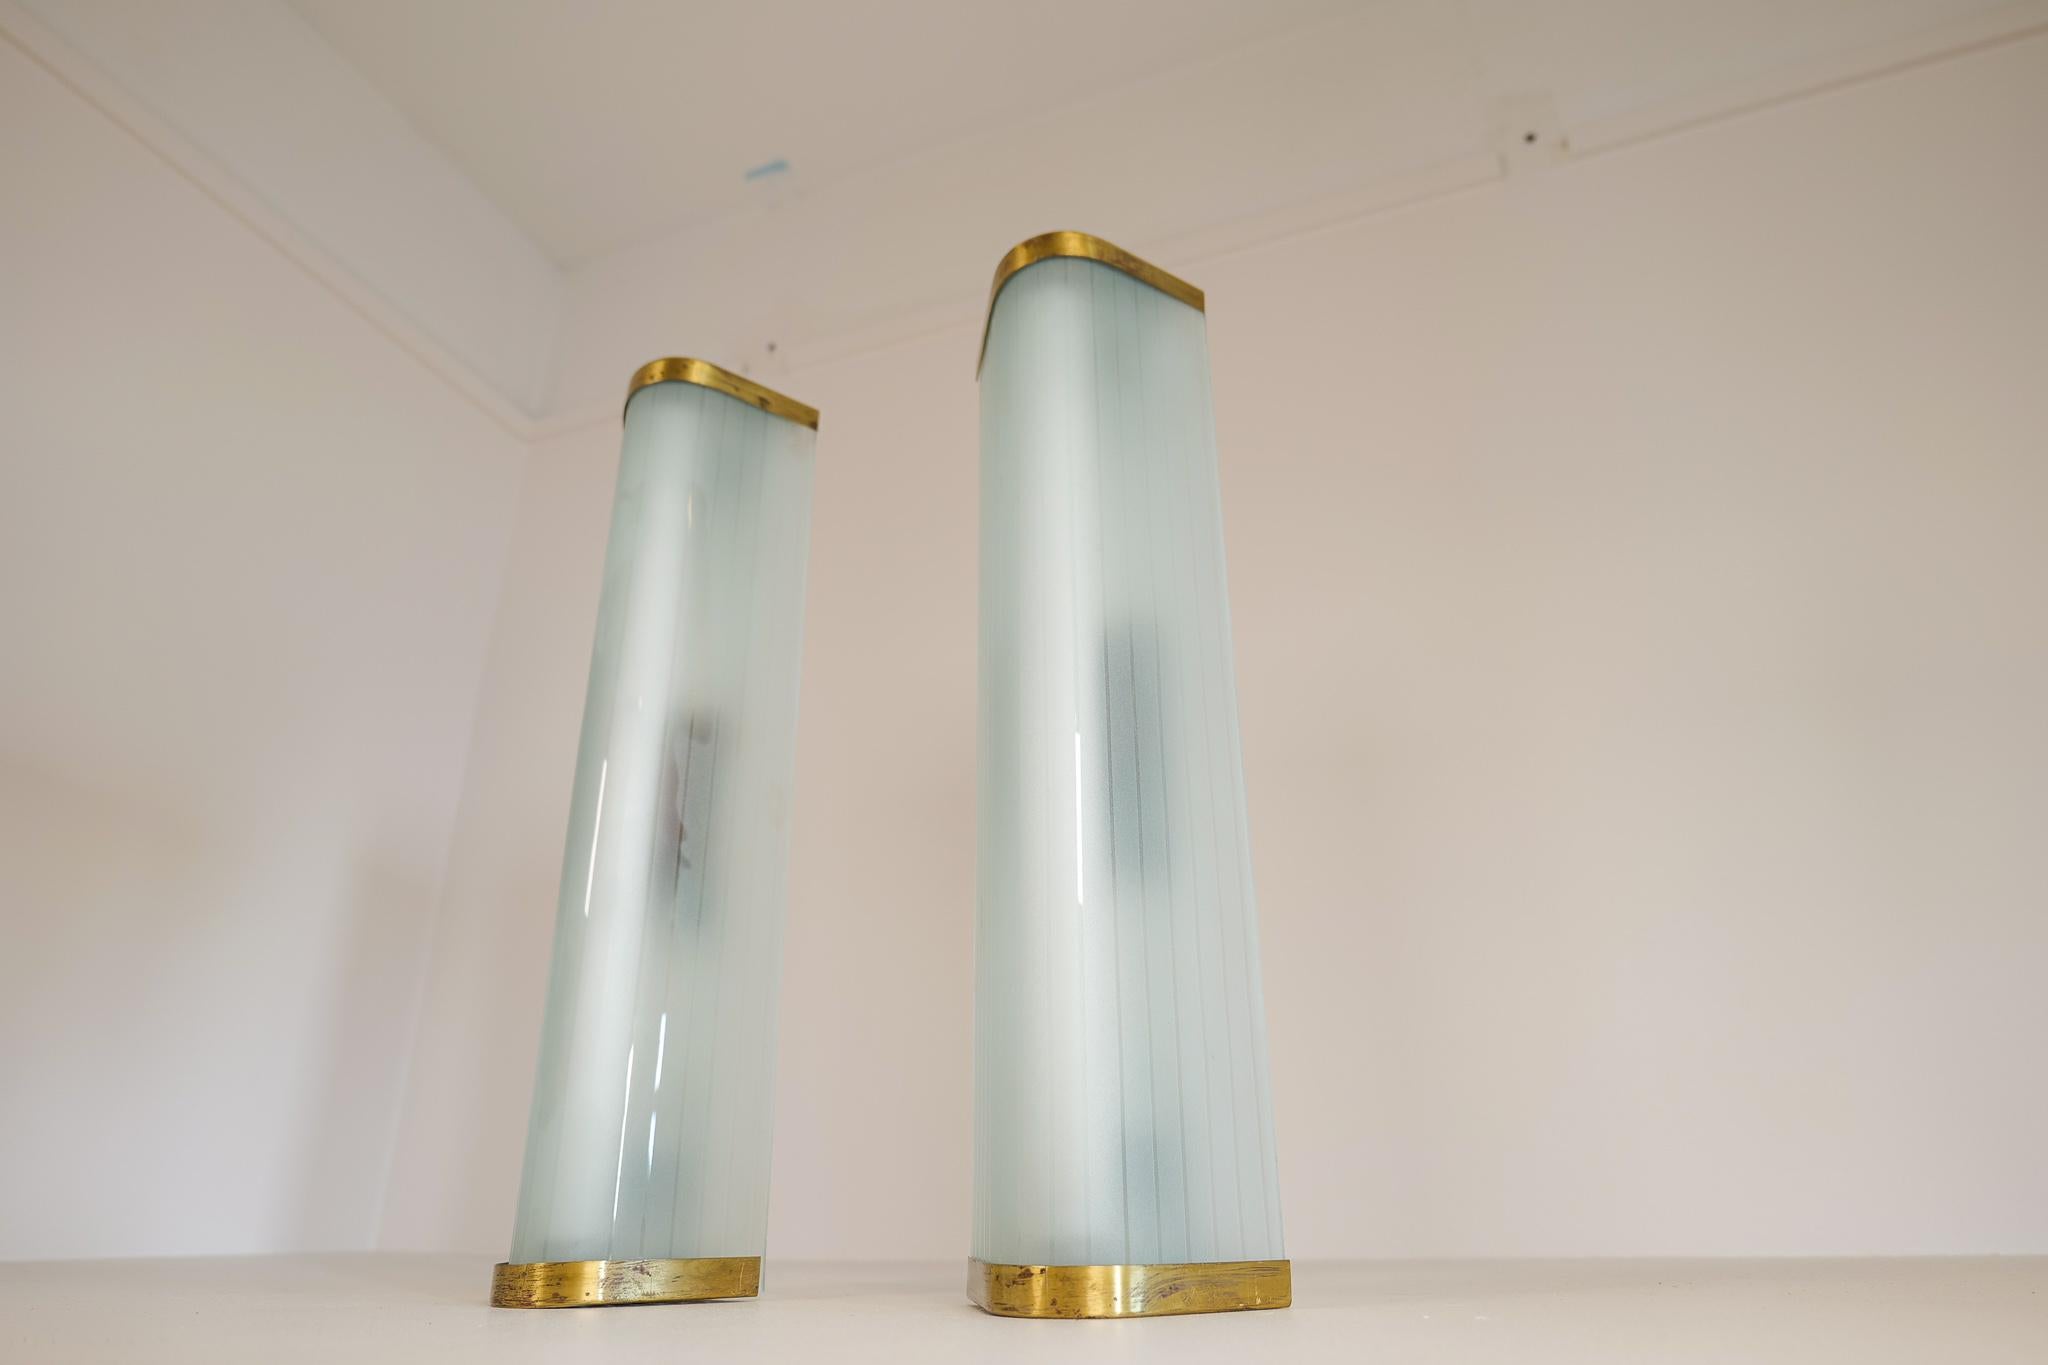 Midcentury Pair of Extra-Large Modern Wall Lamps Attributed to Asea In Good Condition For Sale In Hillringsberg, SE